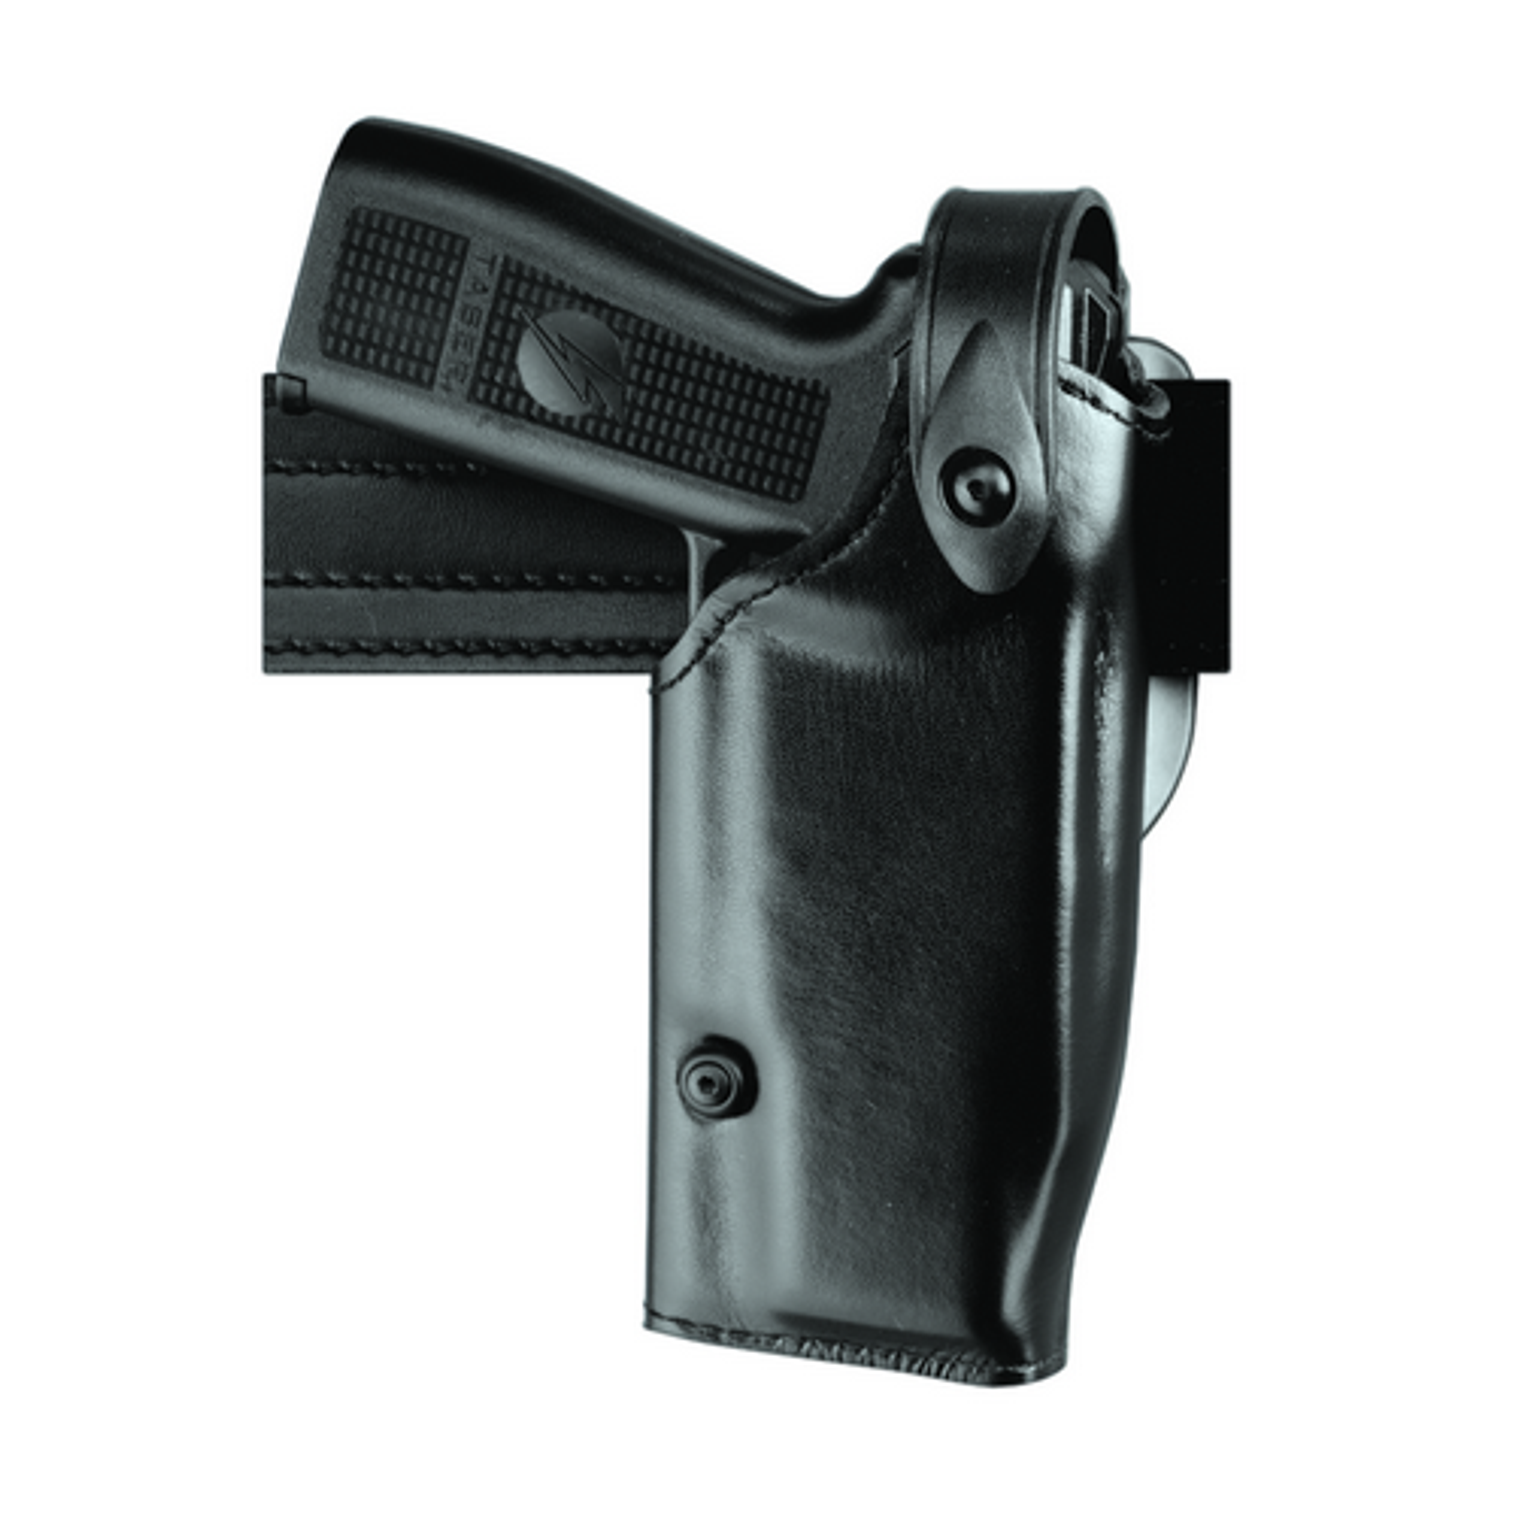 Model 6280 Sls Mid-ride Level Ii Retention Duty Holster For Colt Government 1911